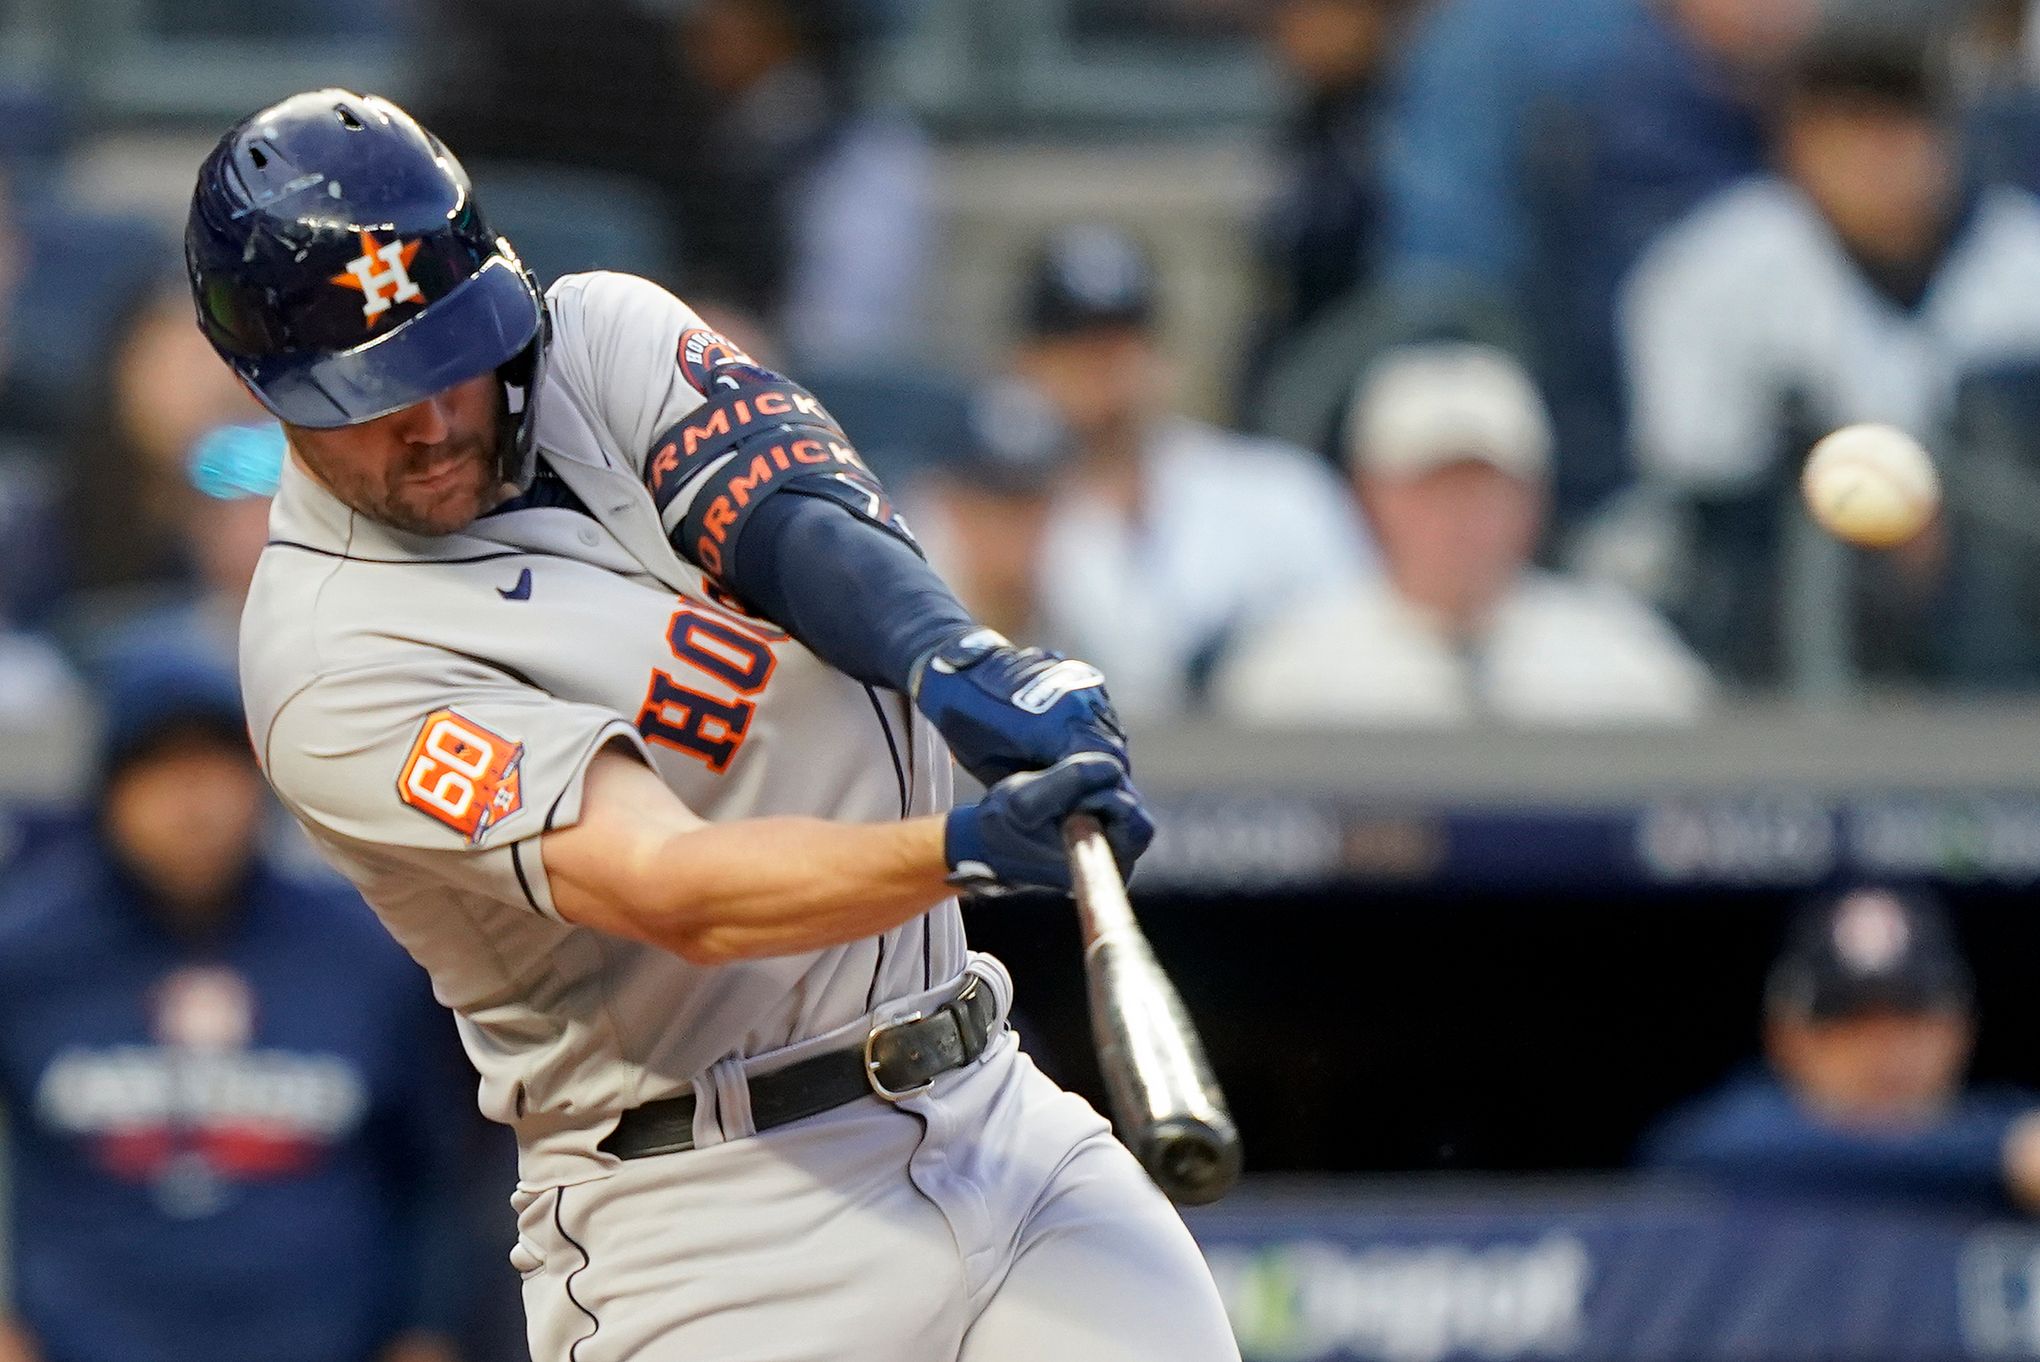 Real Chas: McCormick in CF for Astros, no twin switch here